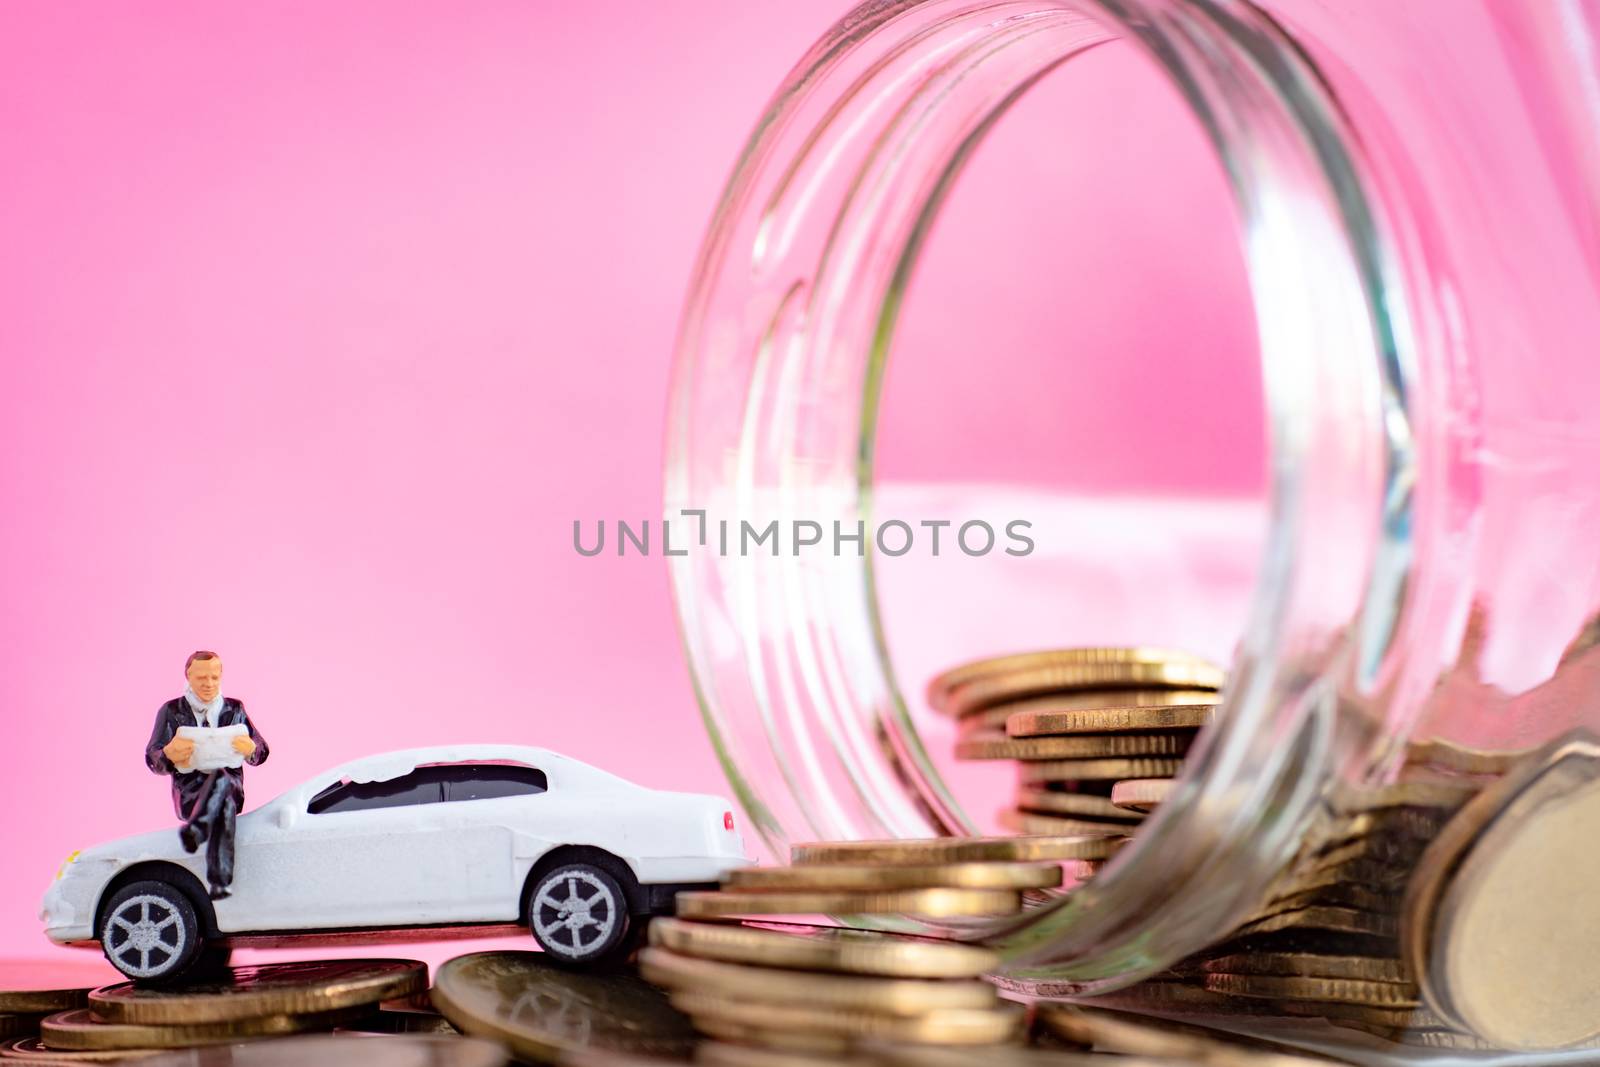 miniture of business model thinking about Investment strategy in by Toefotostock